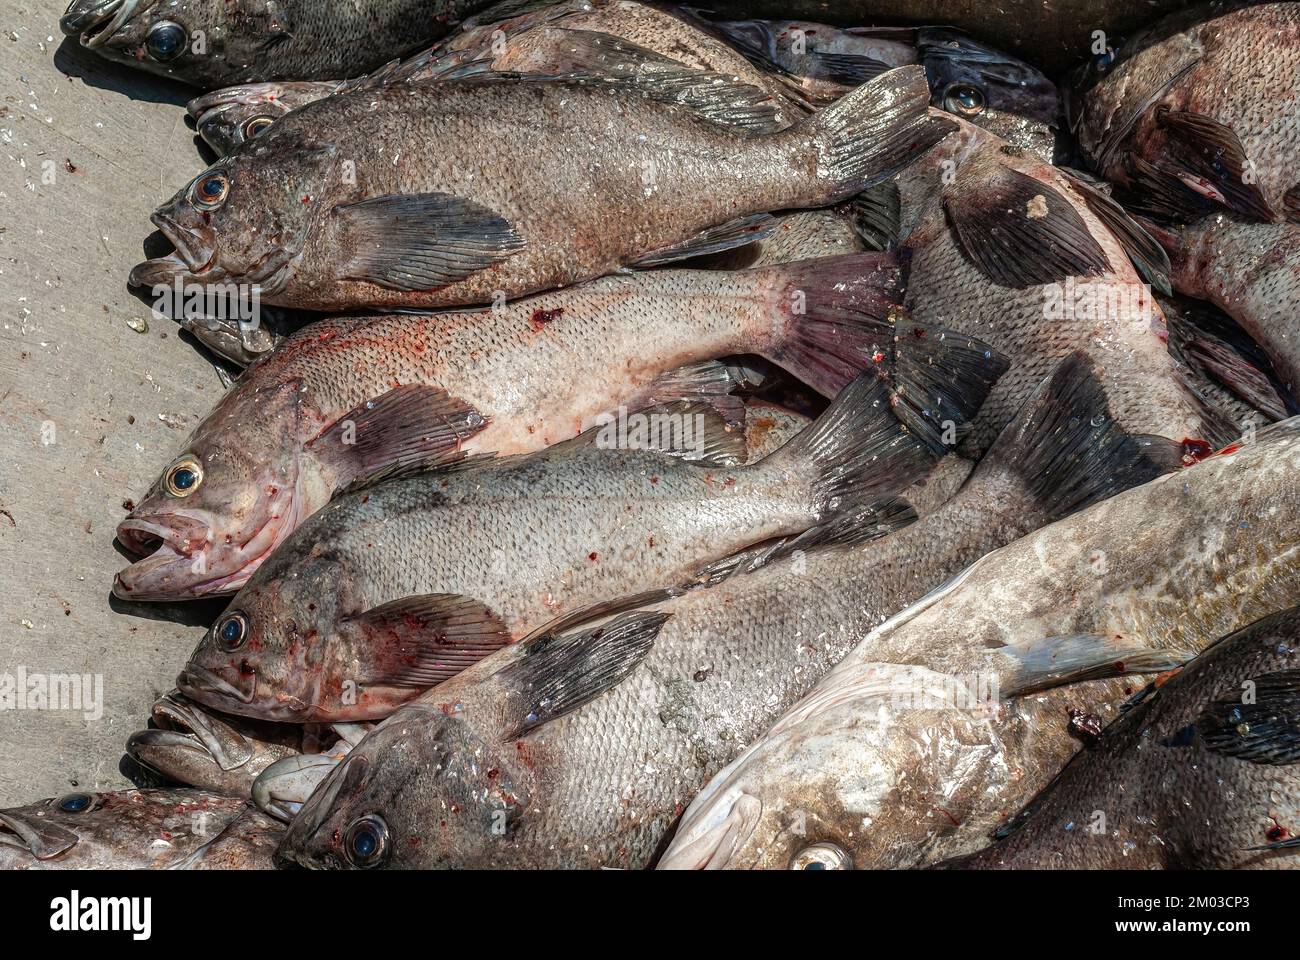 Seward, Alaska, USA - July 22, 2011: Closeup of freshly caugh, dead, heap of wild salmon exposed on cement slab right off the fisching boat in port Stock Photo